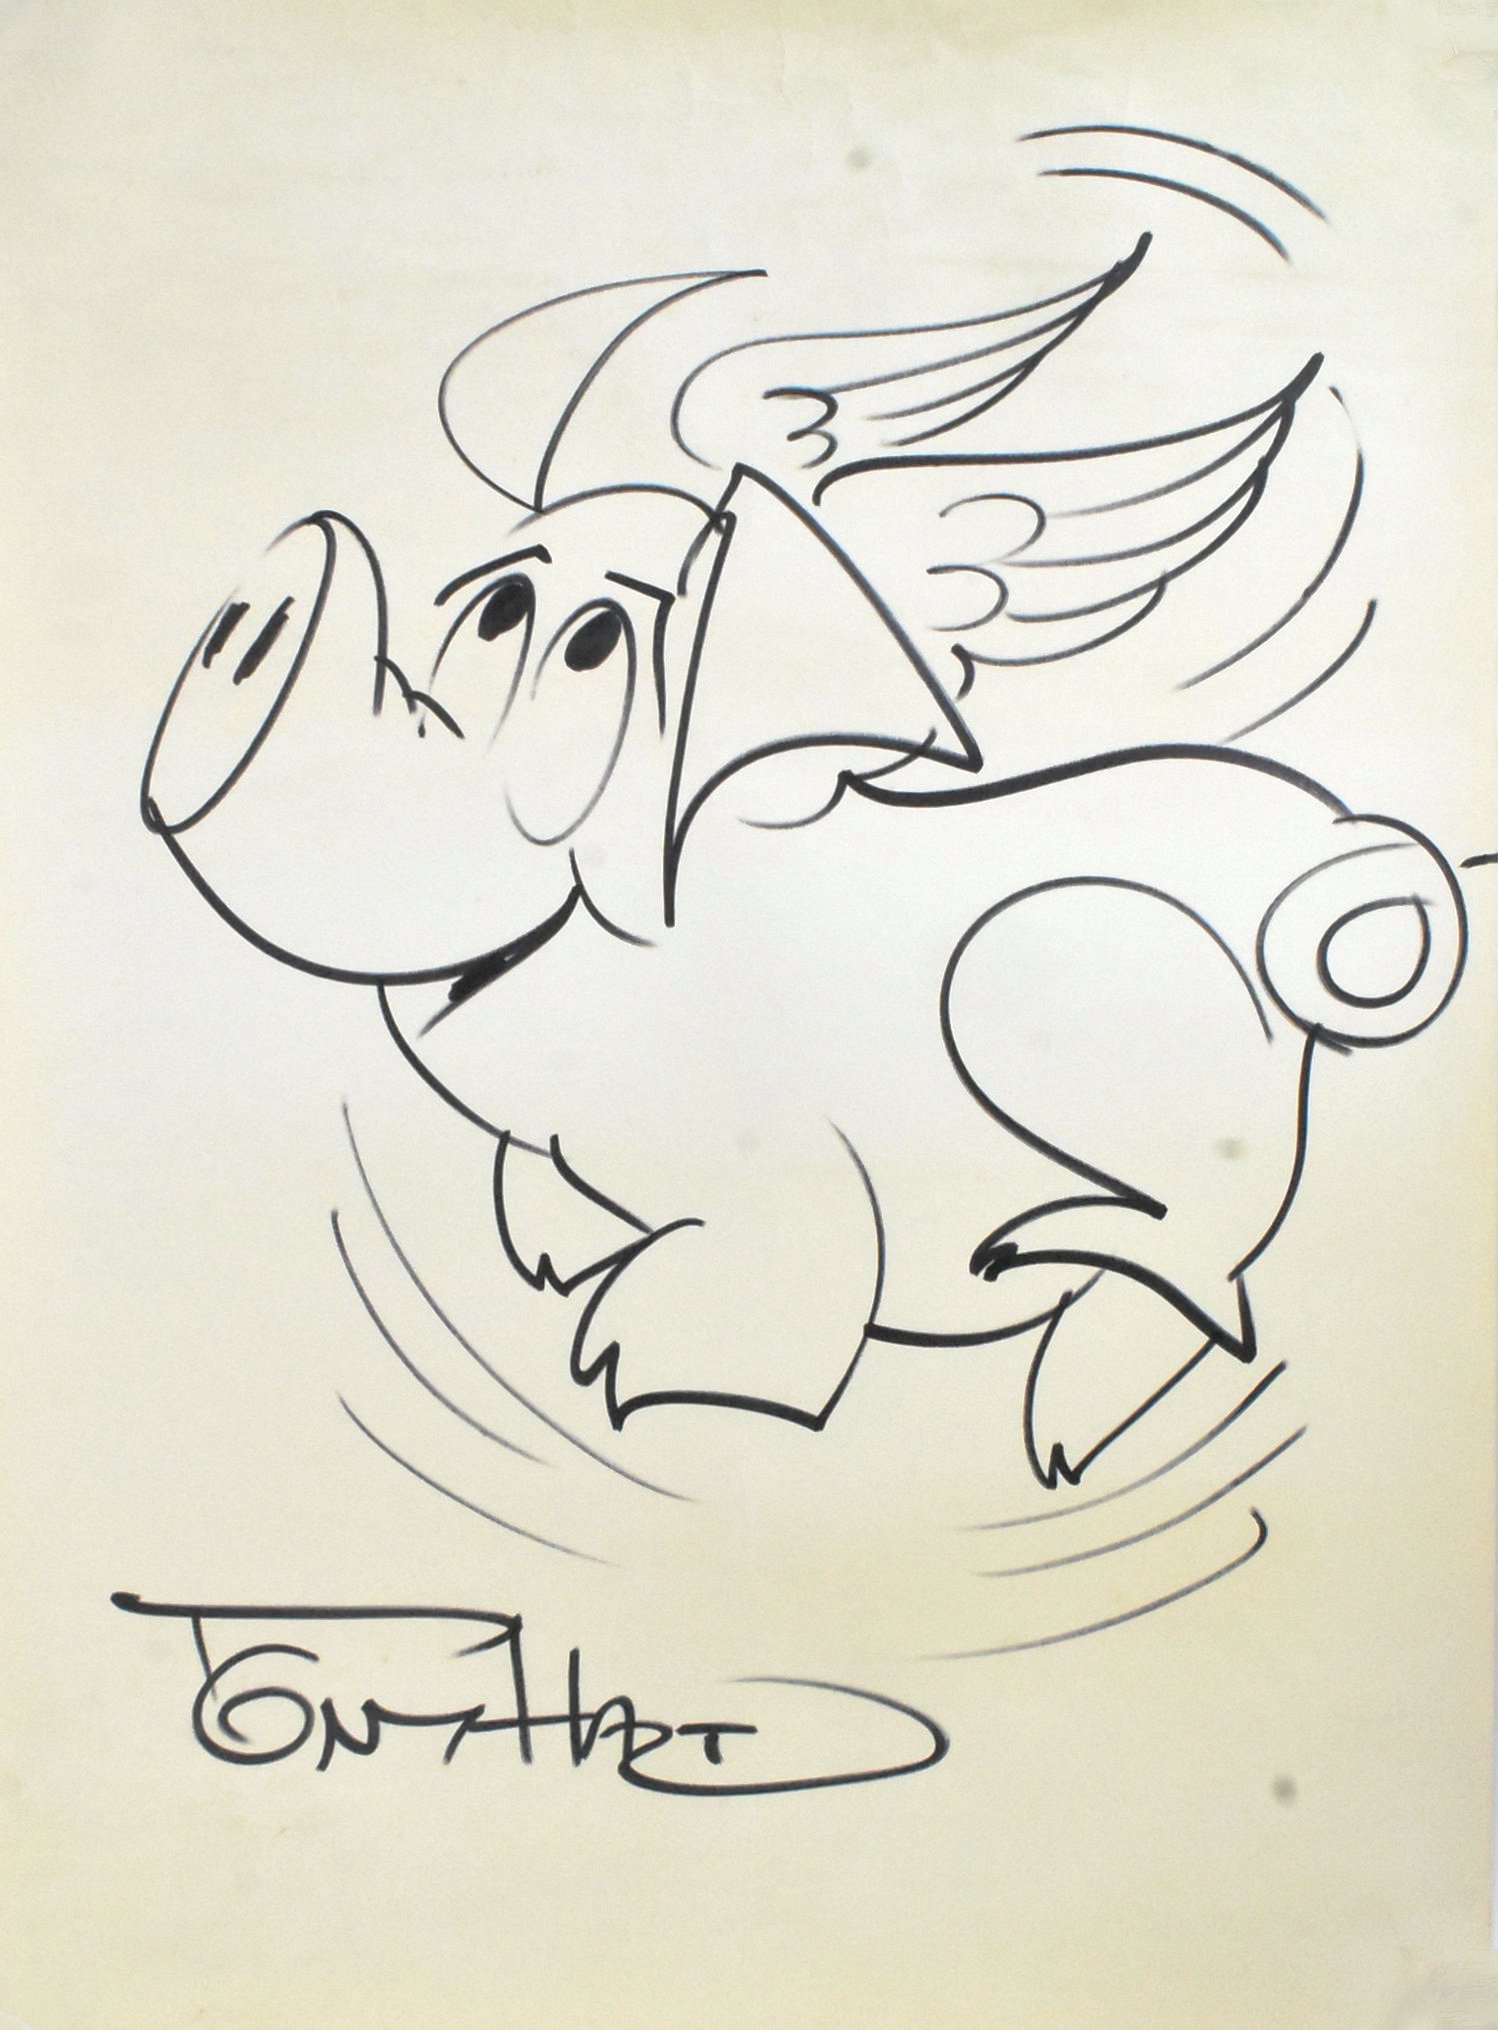 TONY HART (1925-2009) - LARGE DRAWING OF A FLYING PIG